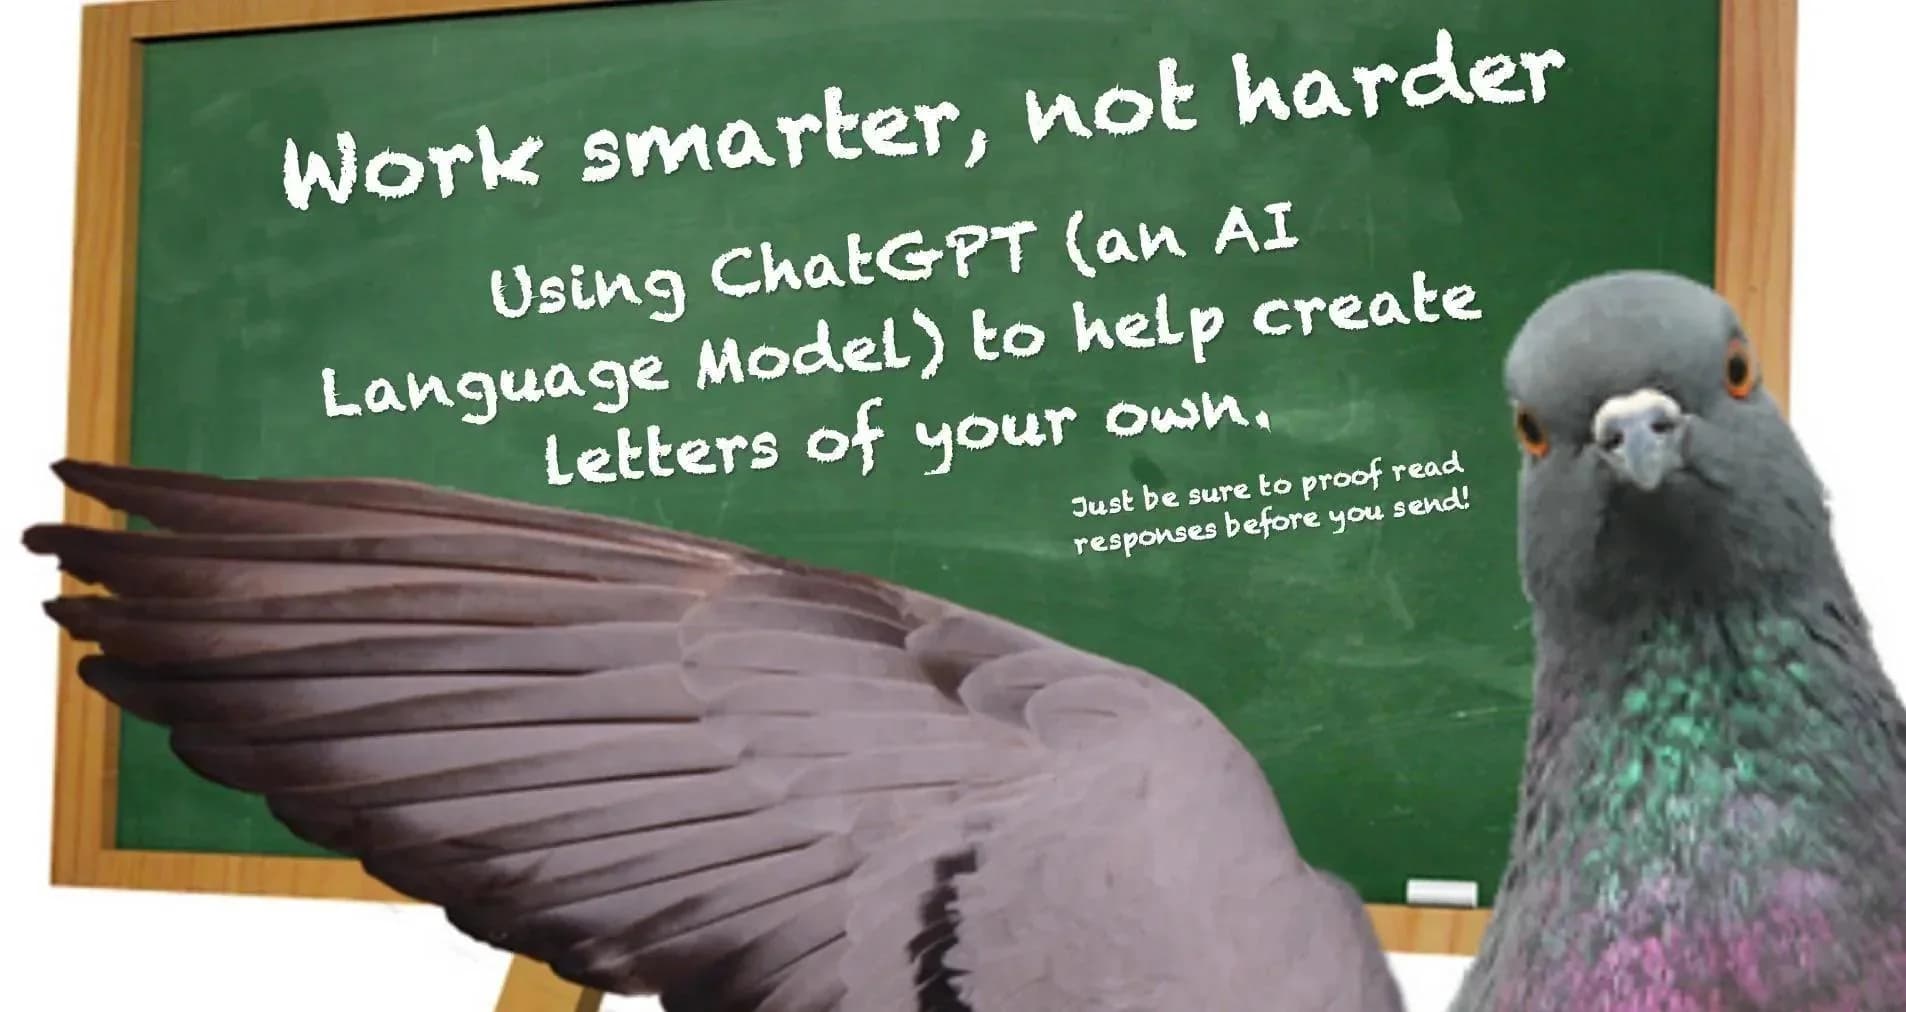 IMAGE: WORK SMARTER, NOT HARDER - USING CHATGPT TO HELP YOU CREATE YOUR LETTERS